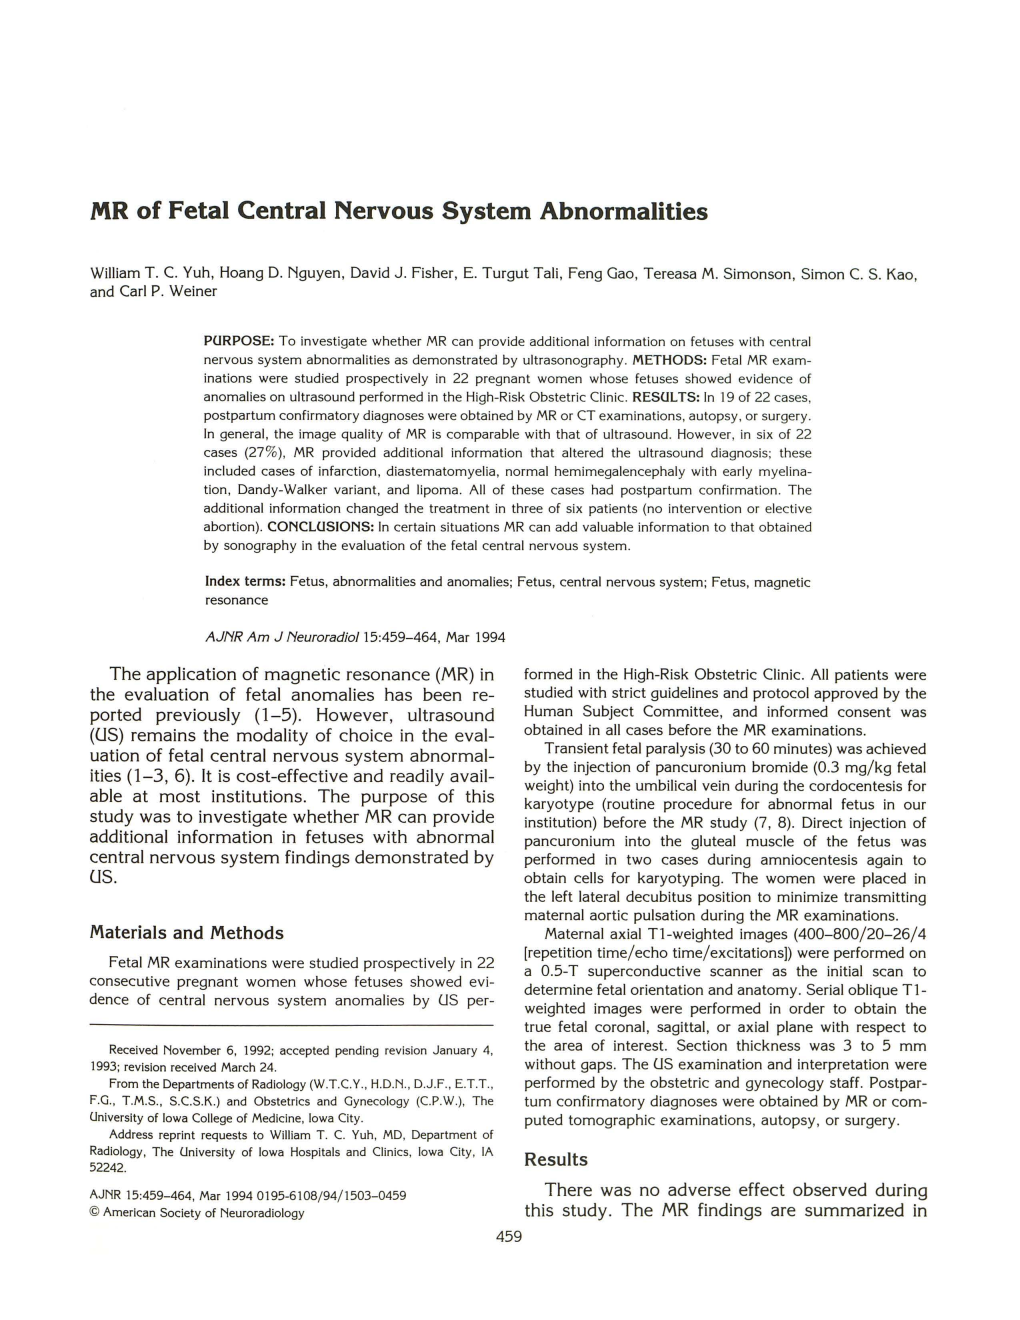 MR of Fetal Central Nervous System Abnormalities